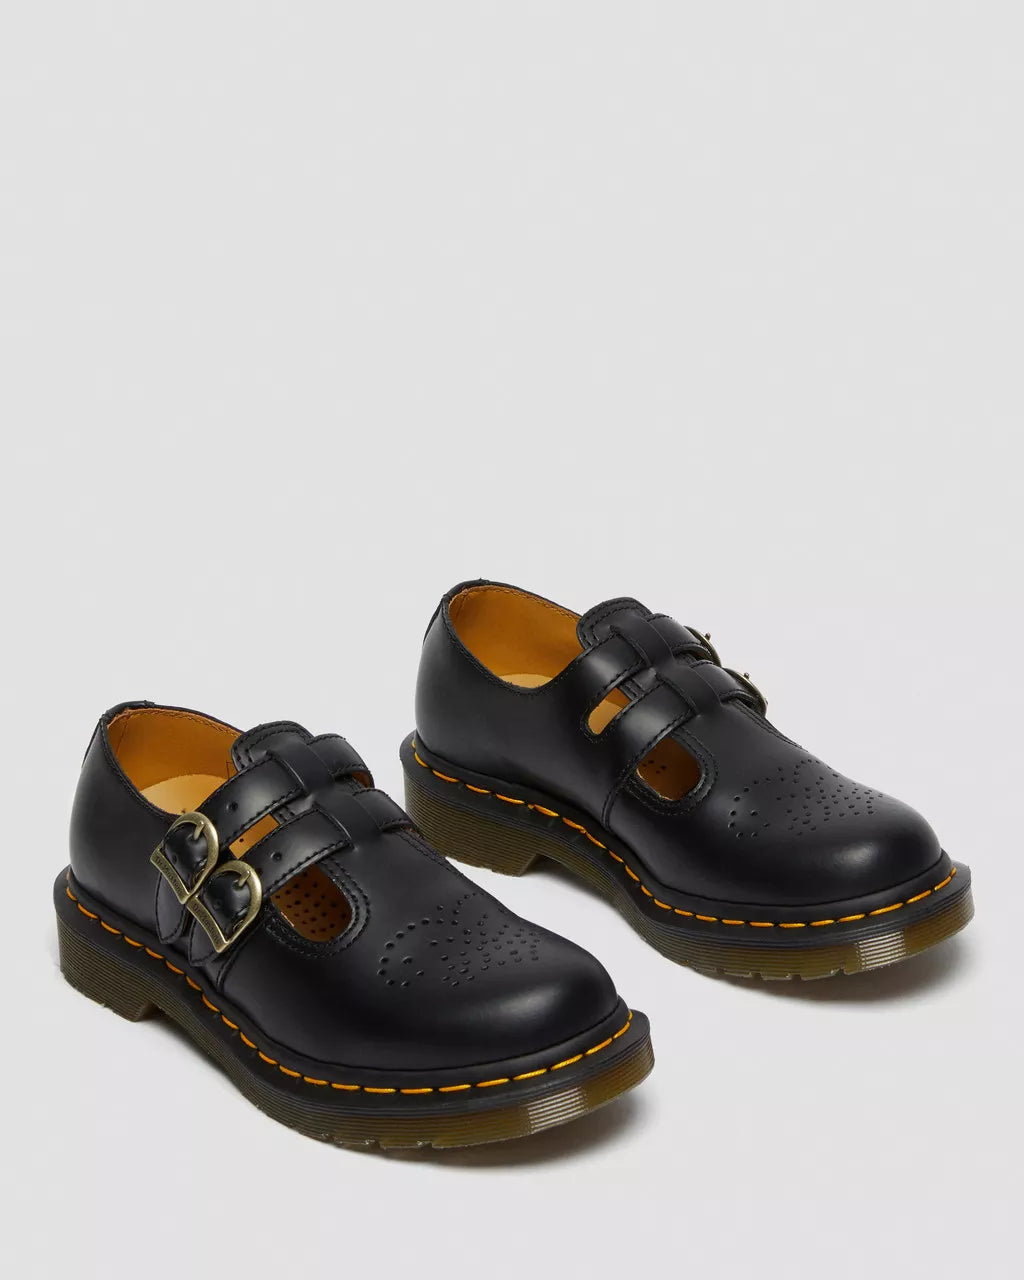 SHOES - DR.MARTENS - 8065 Mary Jane Smooth Leather - PLENTY